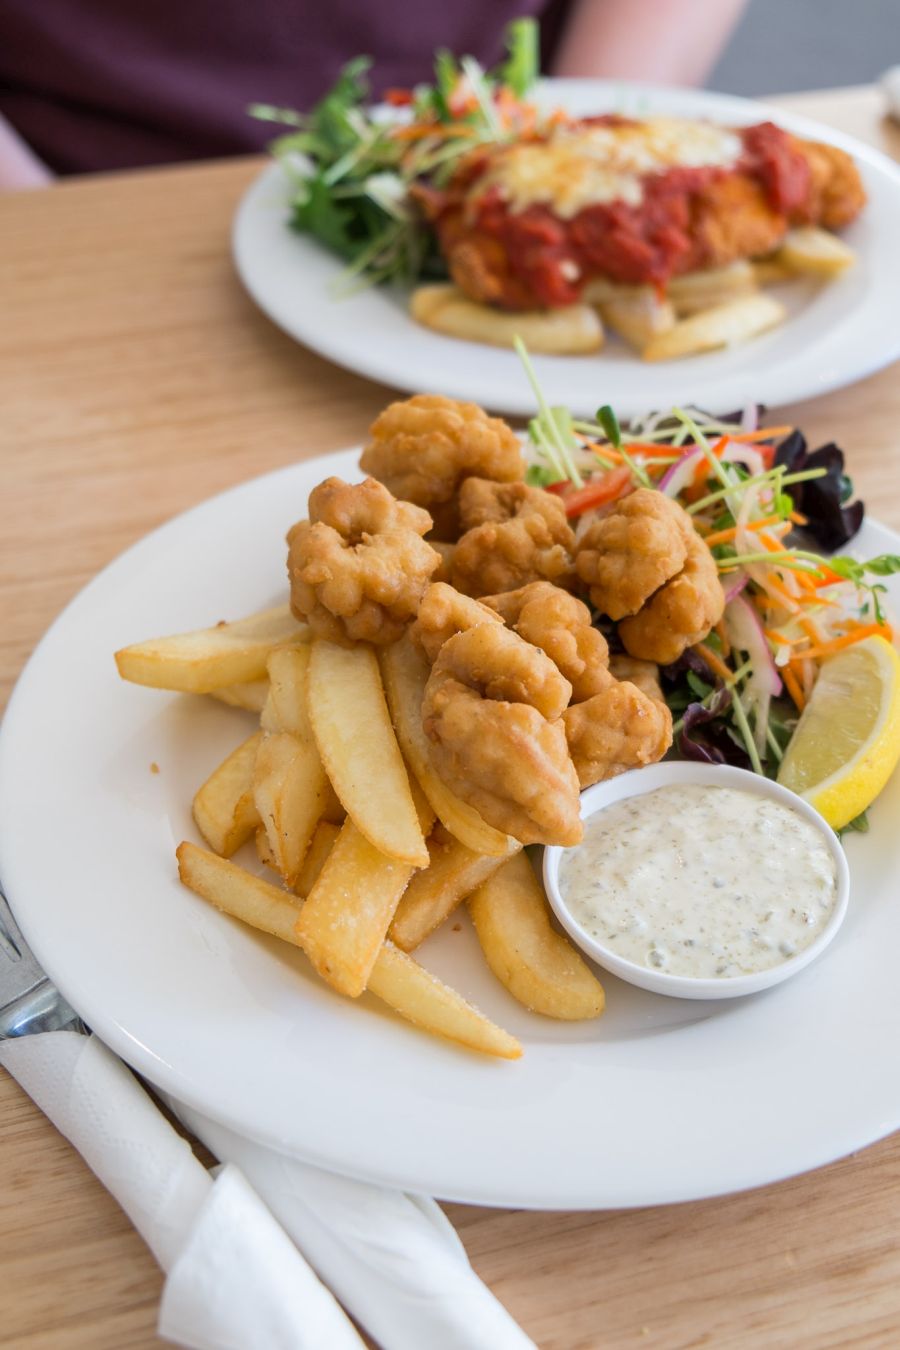 Salt and pepper squid with chips and salad (AU$15 - tour menu)